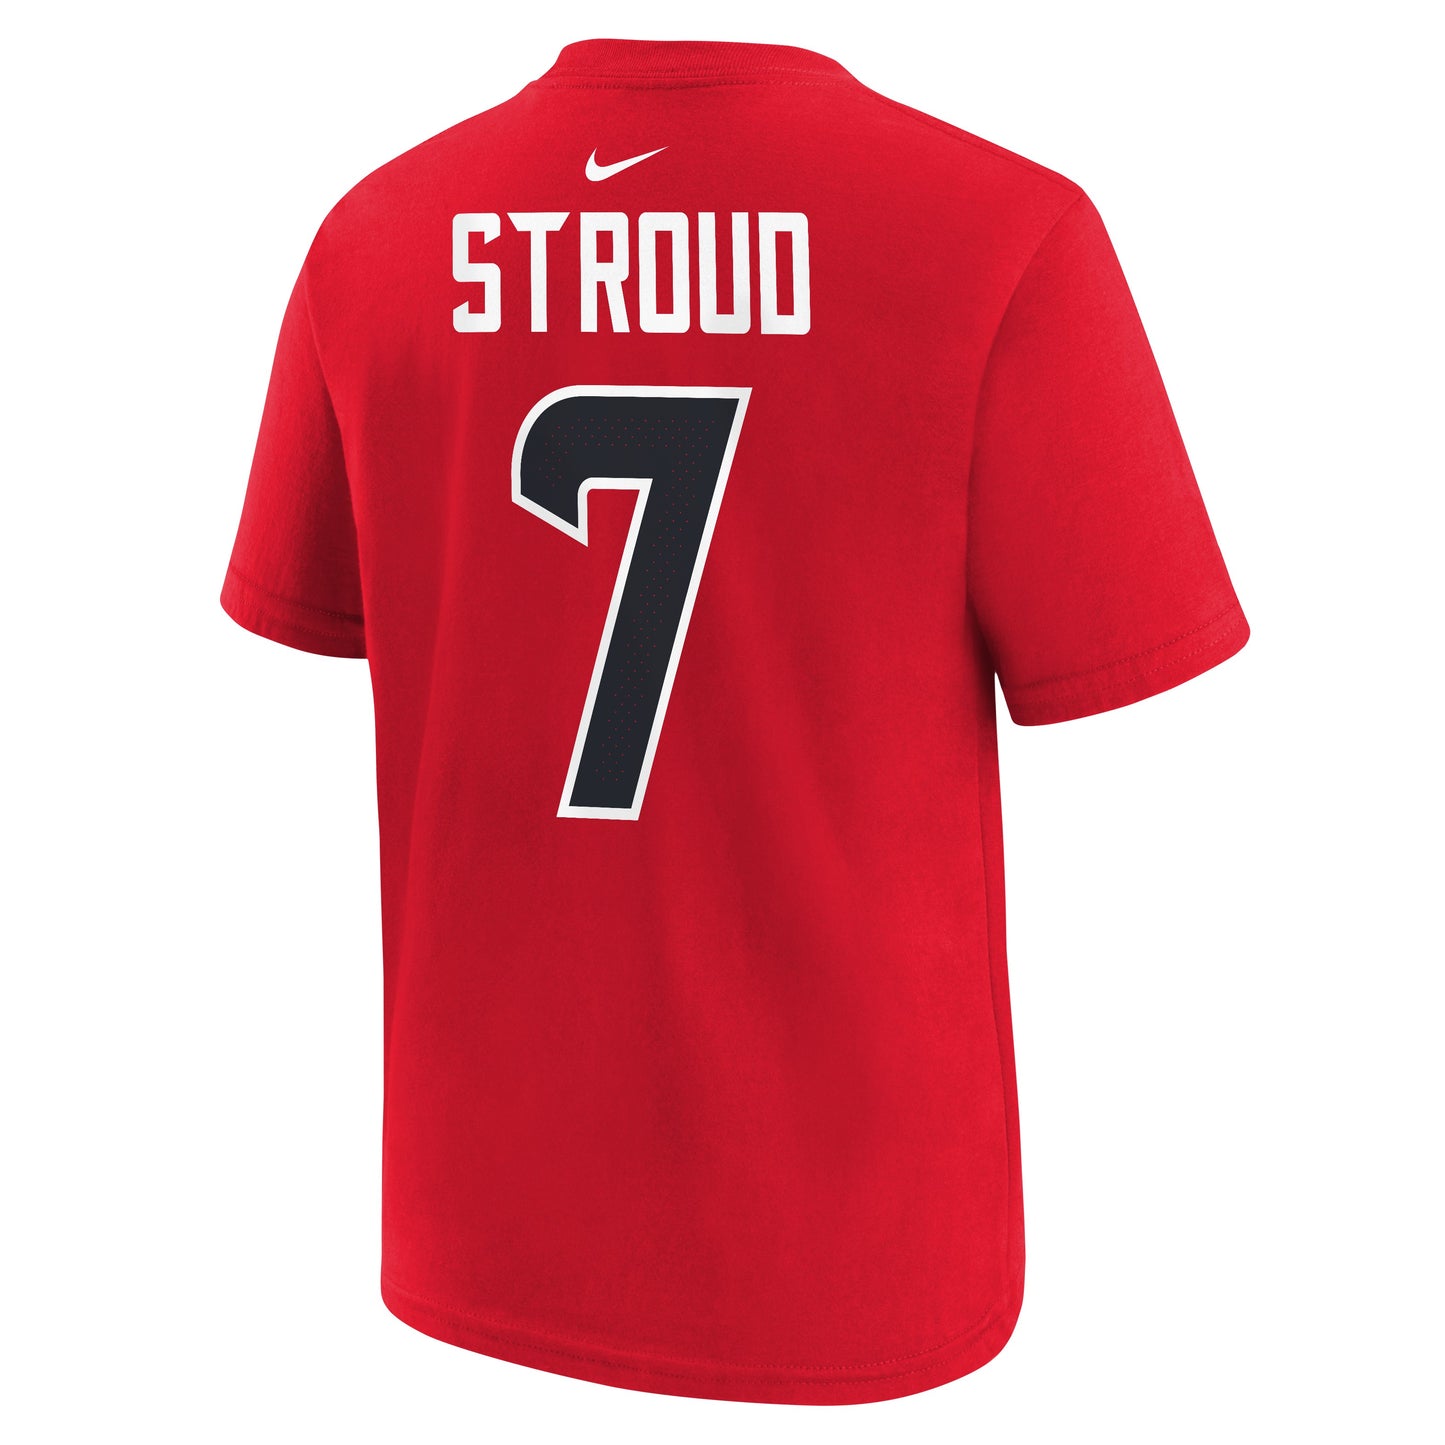 Youth CJ Stroud Houston Texans Nike Red FUSE Name & Number T-Shirt